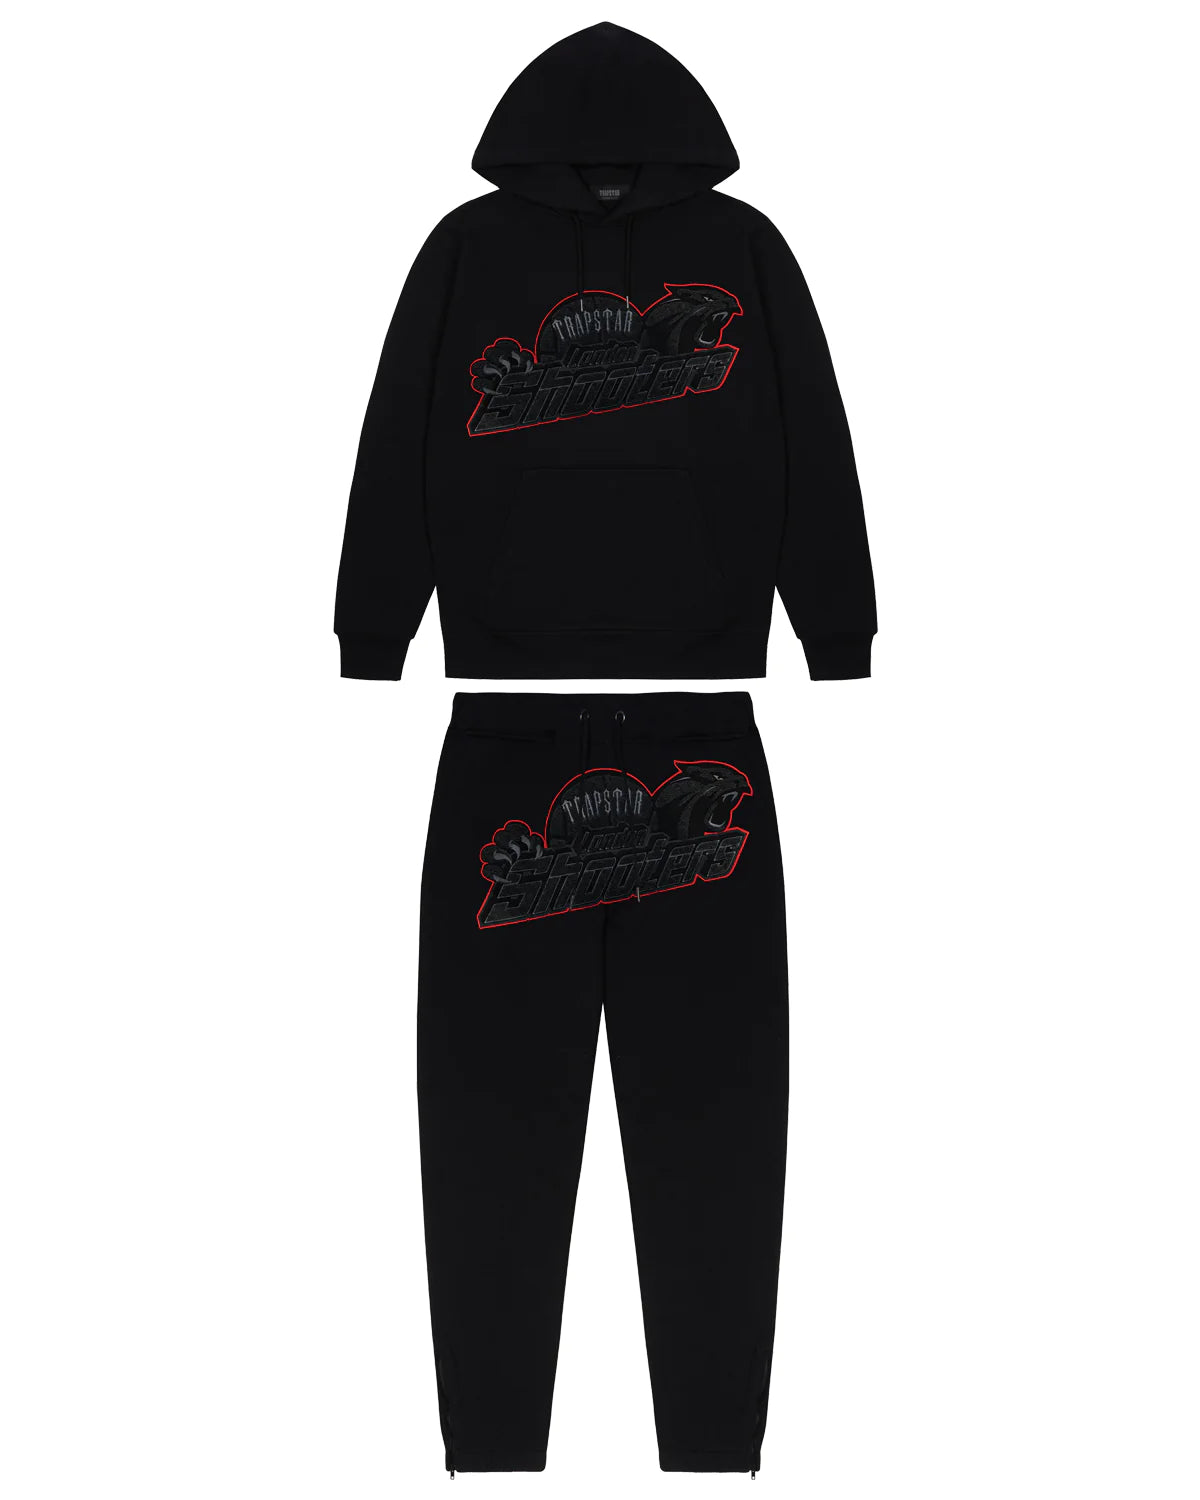 TRAPSTAR SHOOTERS HOODIE TRACKSUIT - BLACK/RED